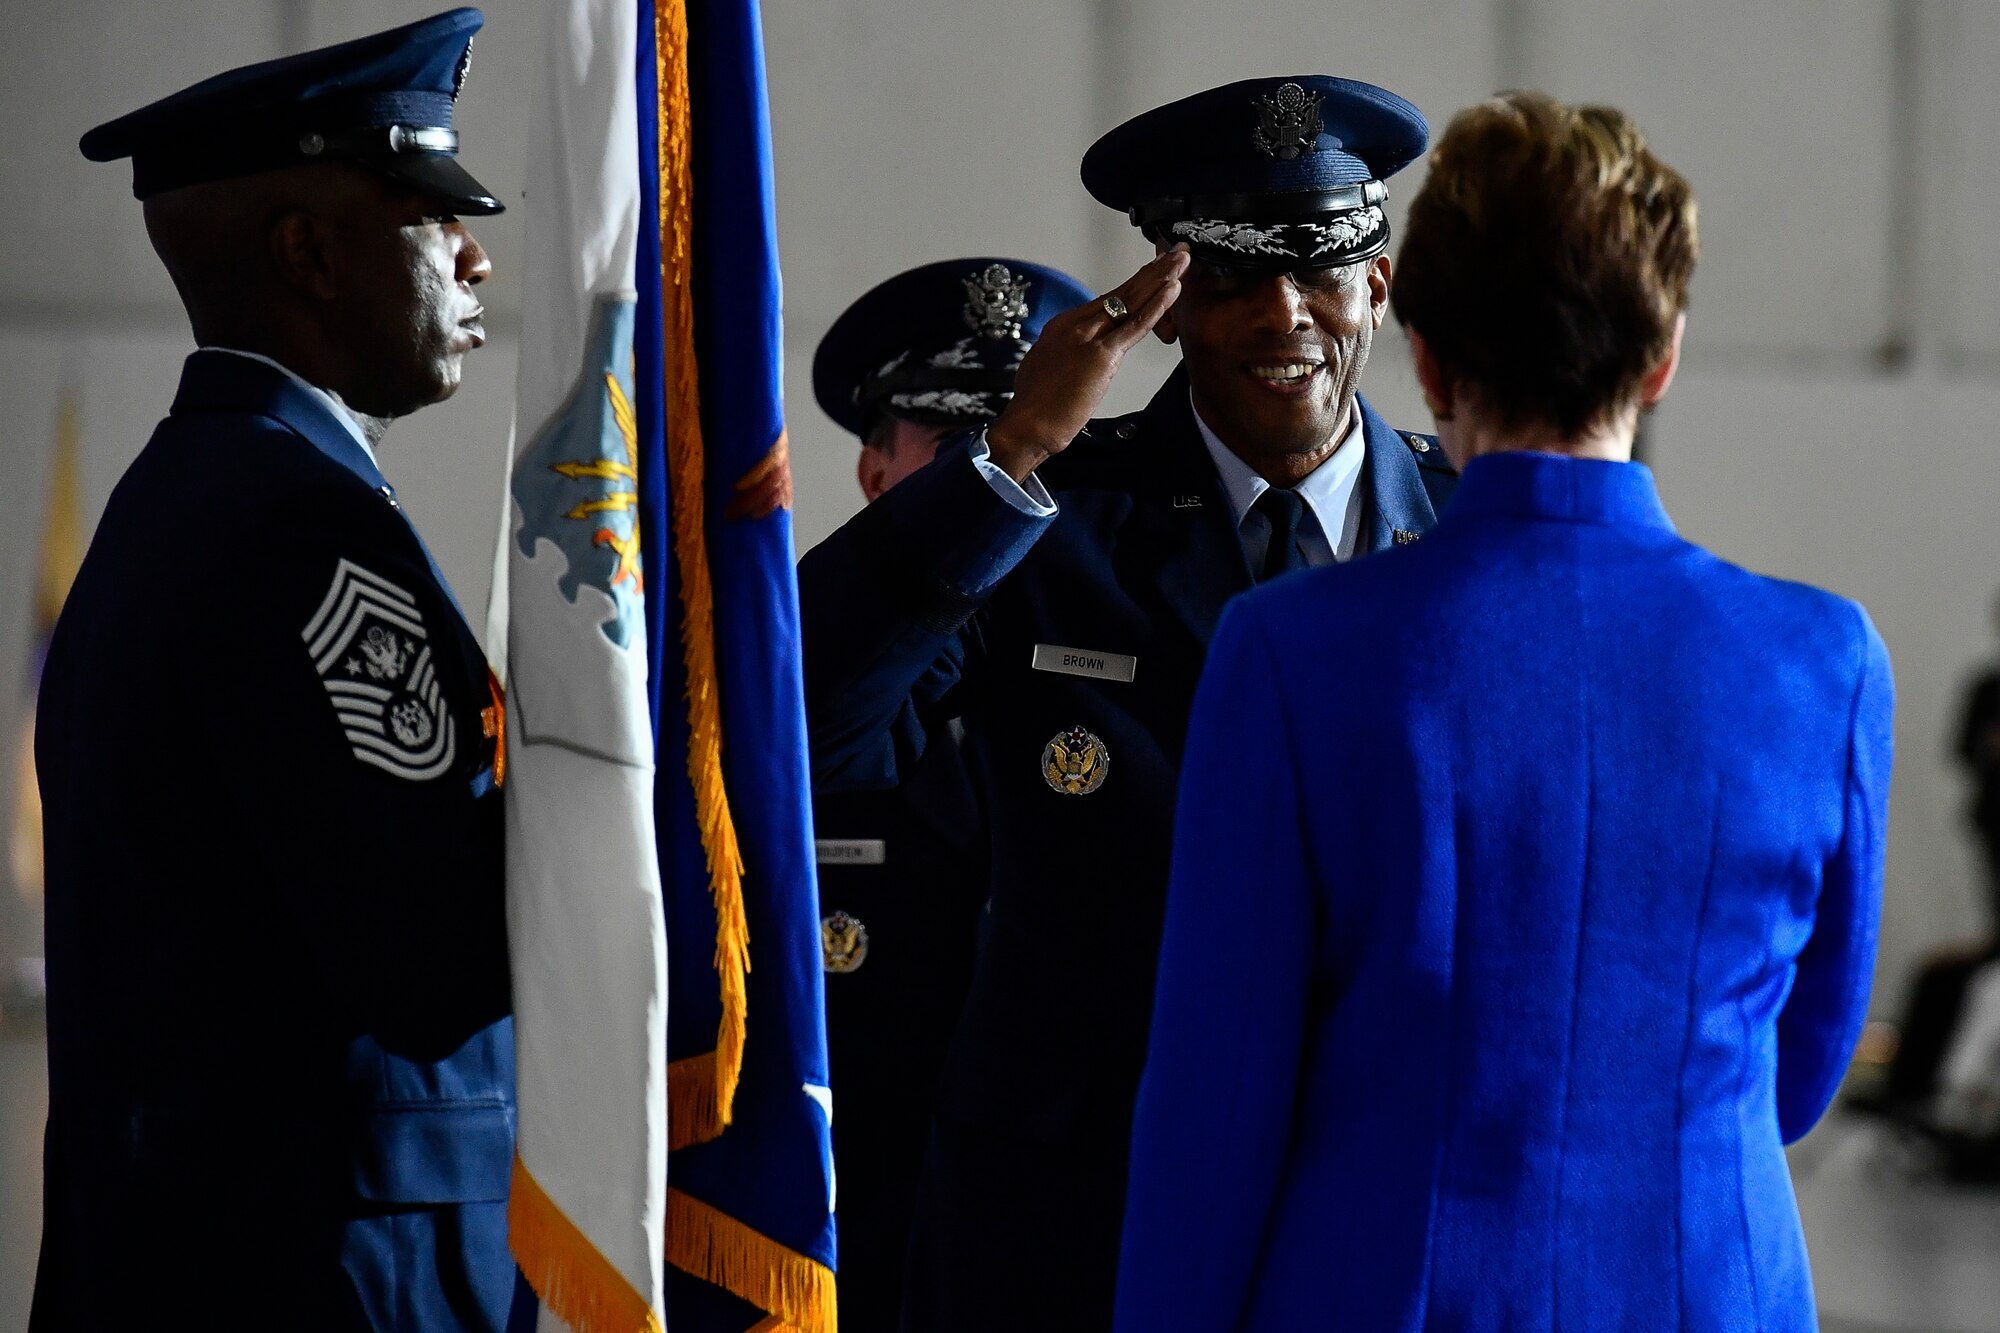 Air Force Chief of Staff Gen. Charles Q. Brown Jr. salutes Secretary of the Air Force Barbara M. Barrett during a change of responsibility ceremony at Joint Base Andrews, Md., Aug. 6, 2020. Brown replaced Gen. David L. Goldfein as the 22nd chief of staff. (U.S. Air Force photo by Eric Dietrich)